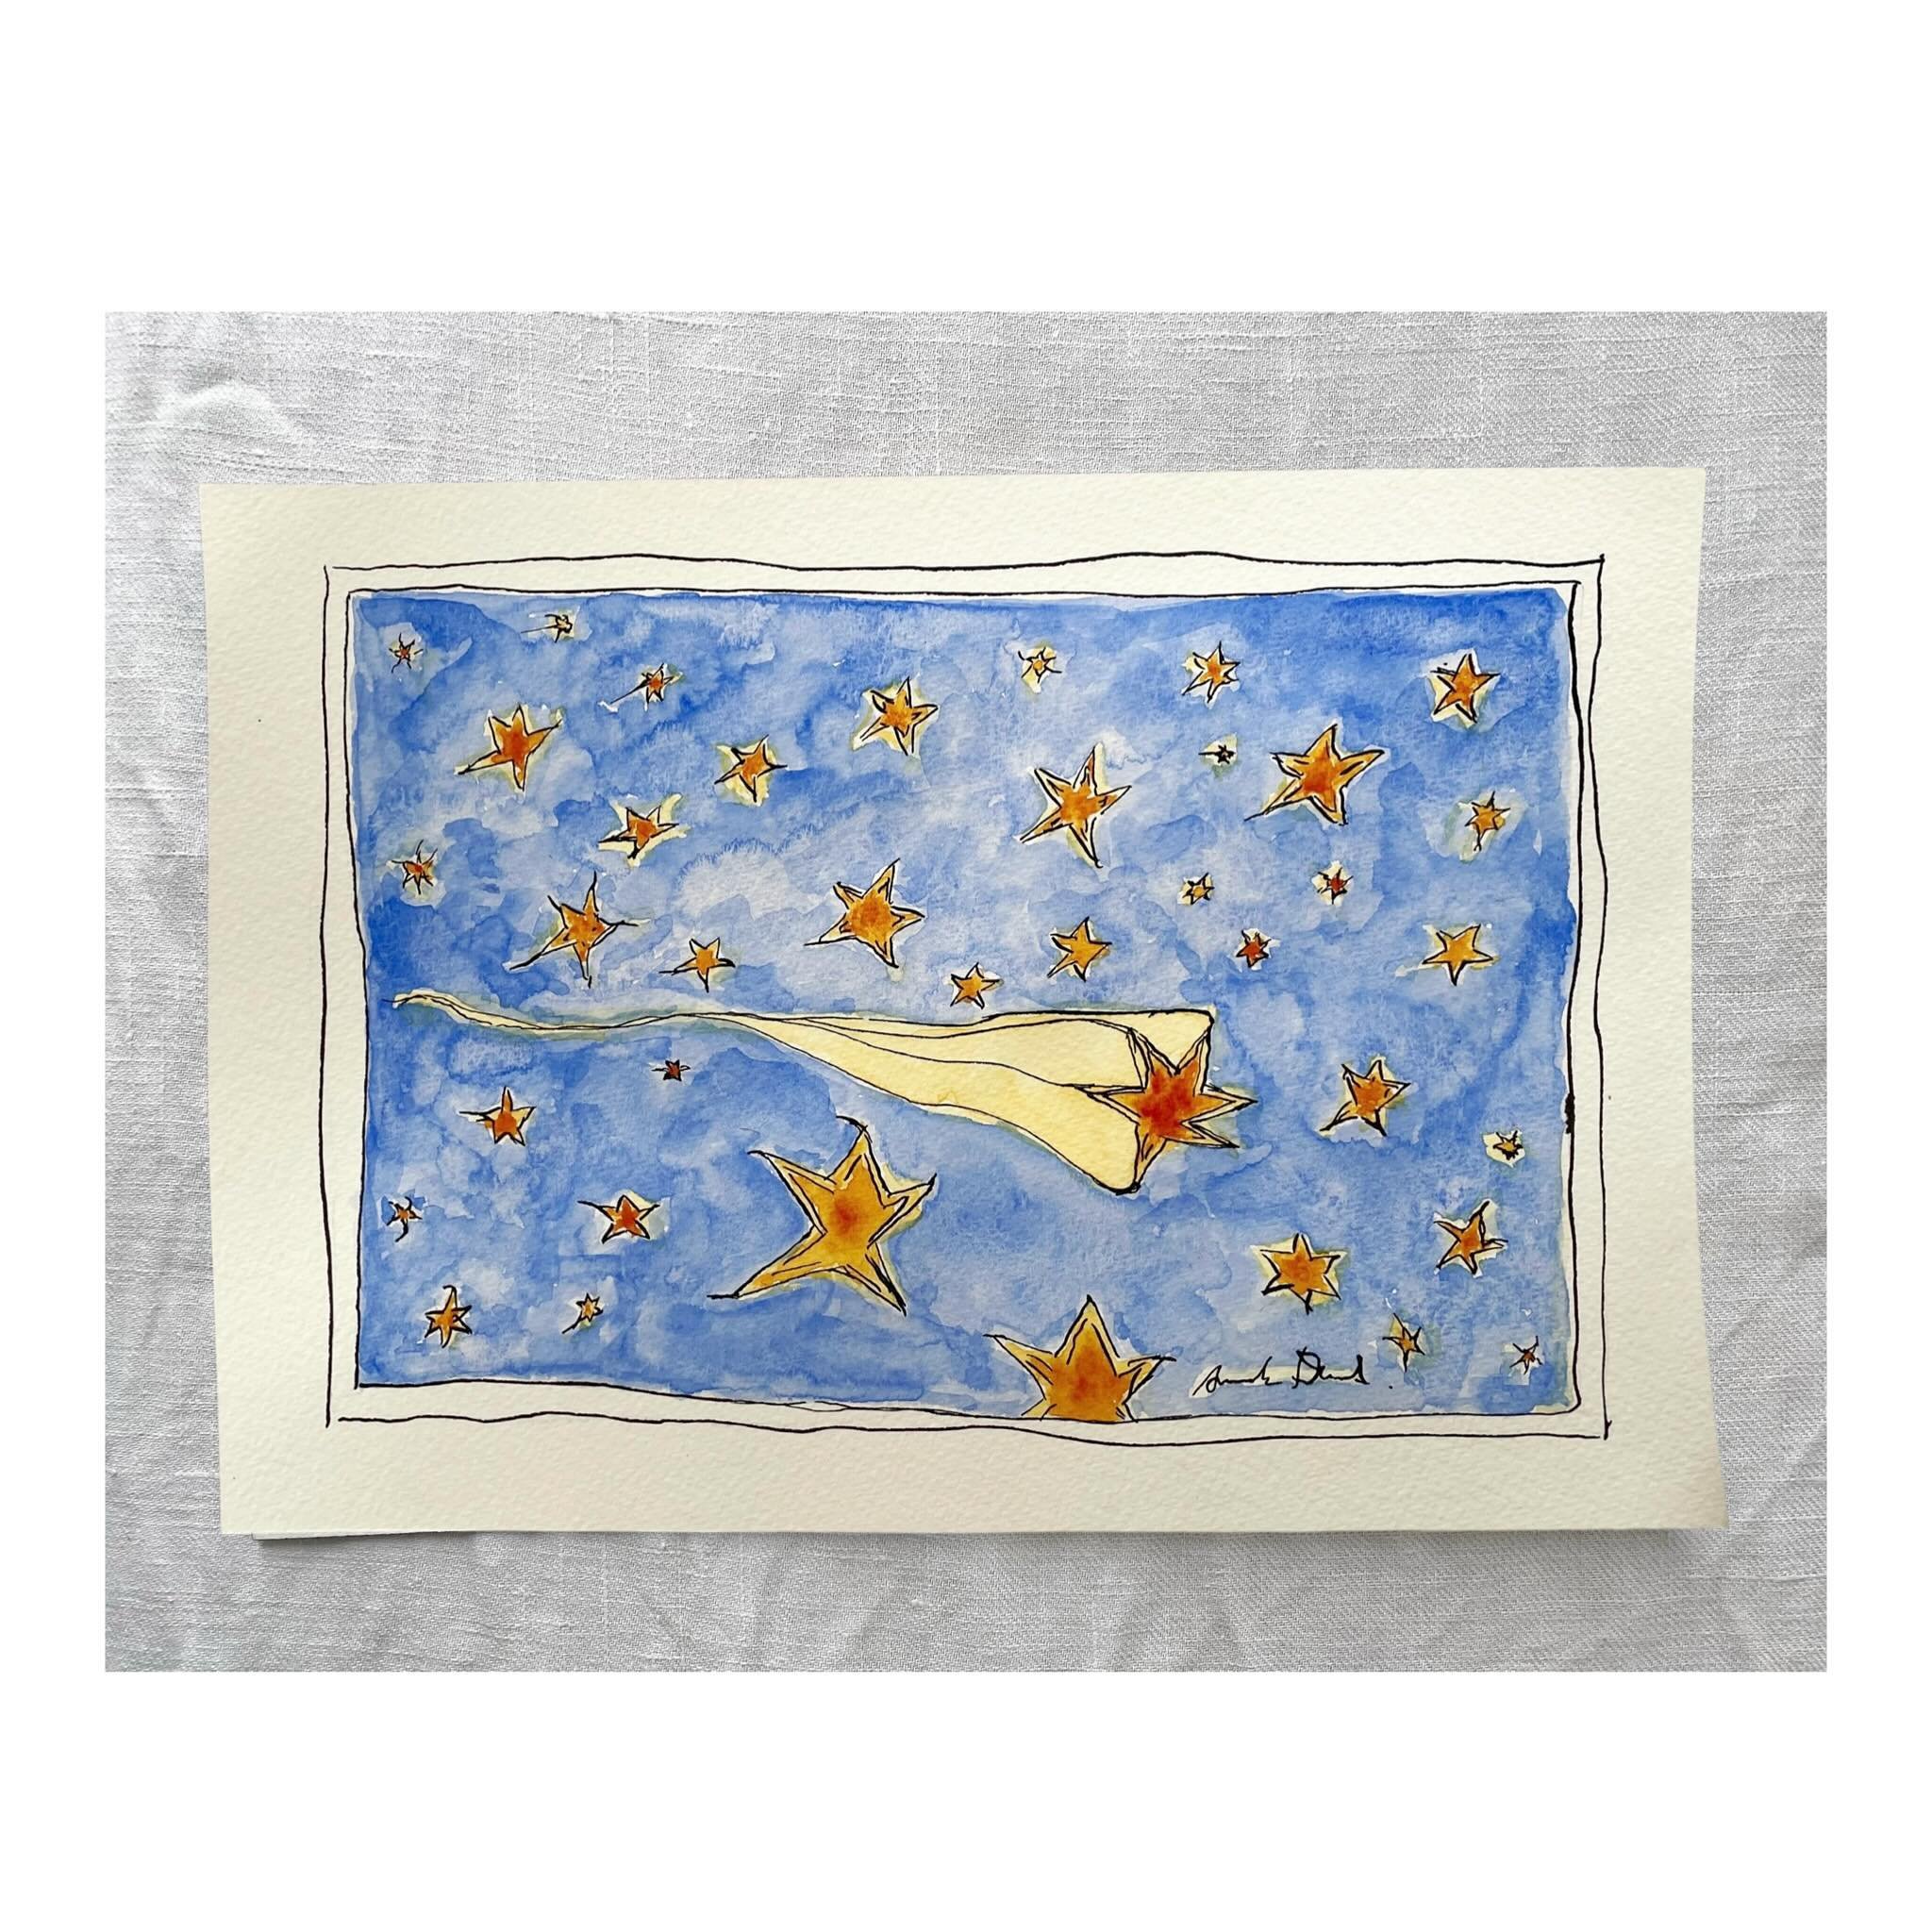 &Eacute;TOILES DU SOIR ✨
EVENING STARS

Deep French blue folds around the evening stars in the Provence sky.

Original Masterwork 

Freehand fine-line drawing with Ink dip fountain pen 

Hand-painted in Provence. 20 November 2023. 

Signed by the art